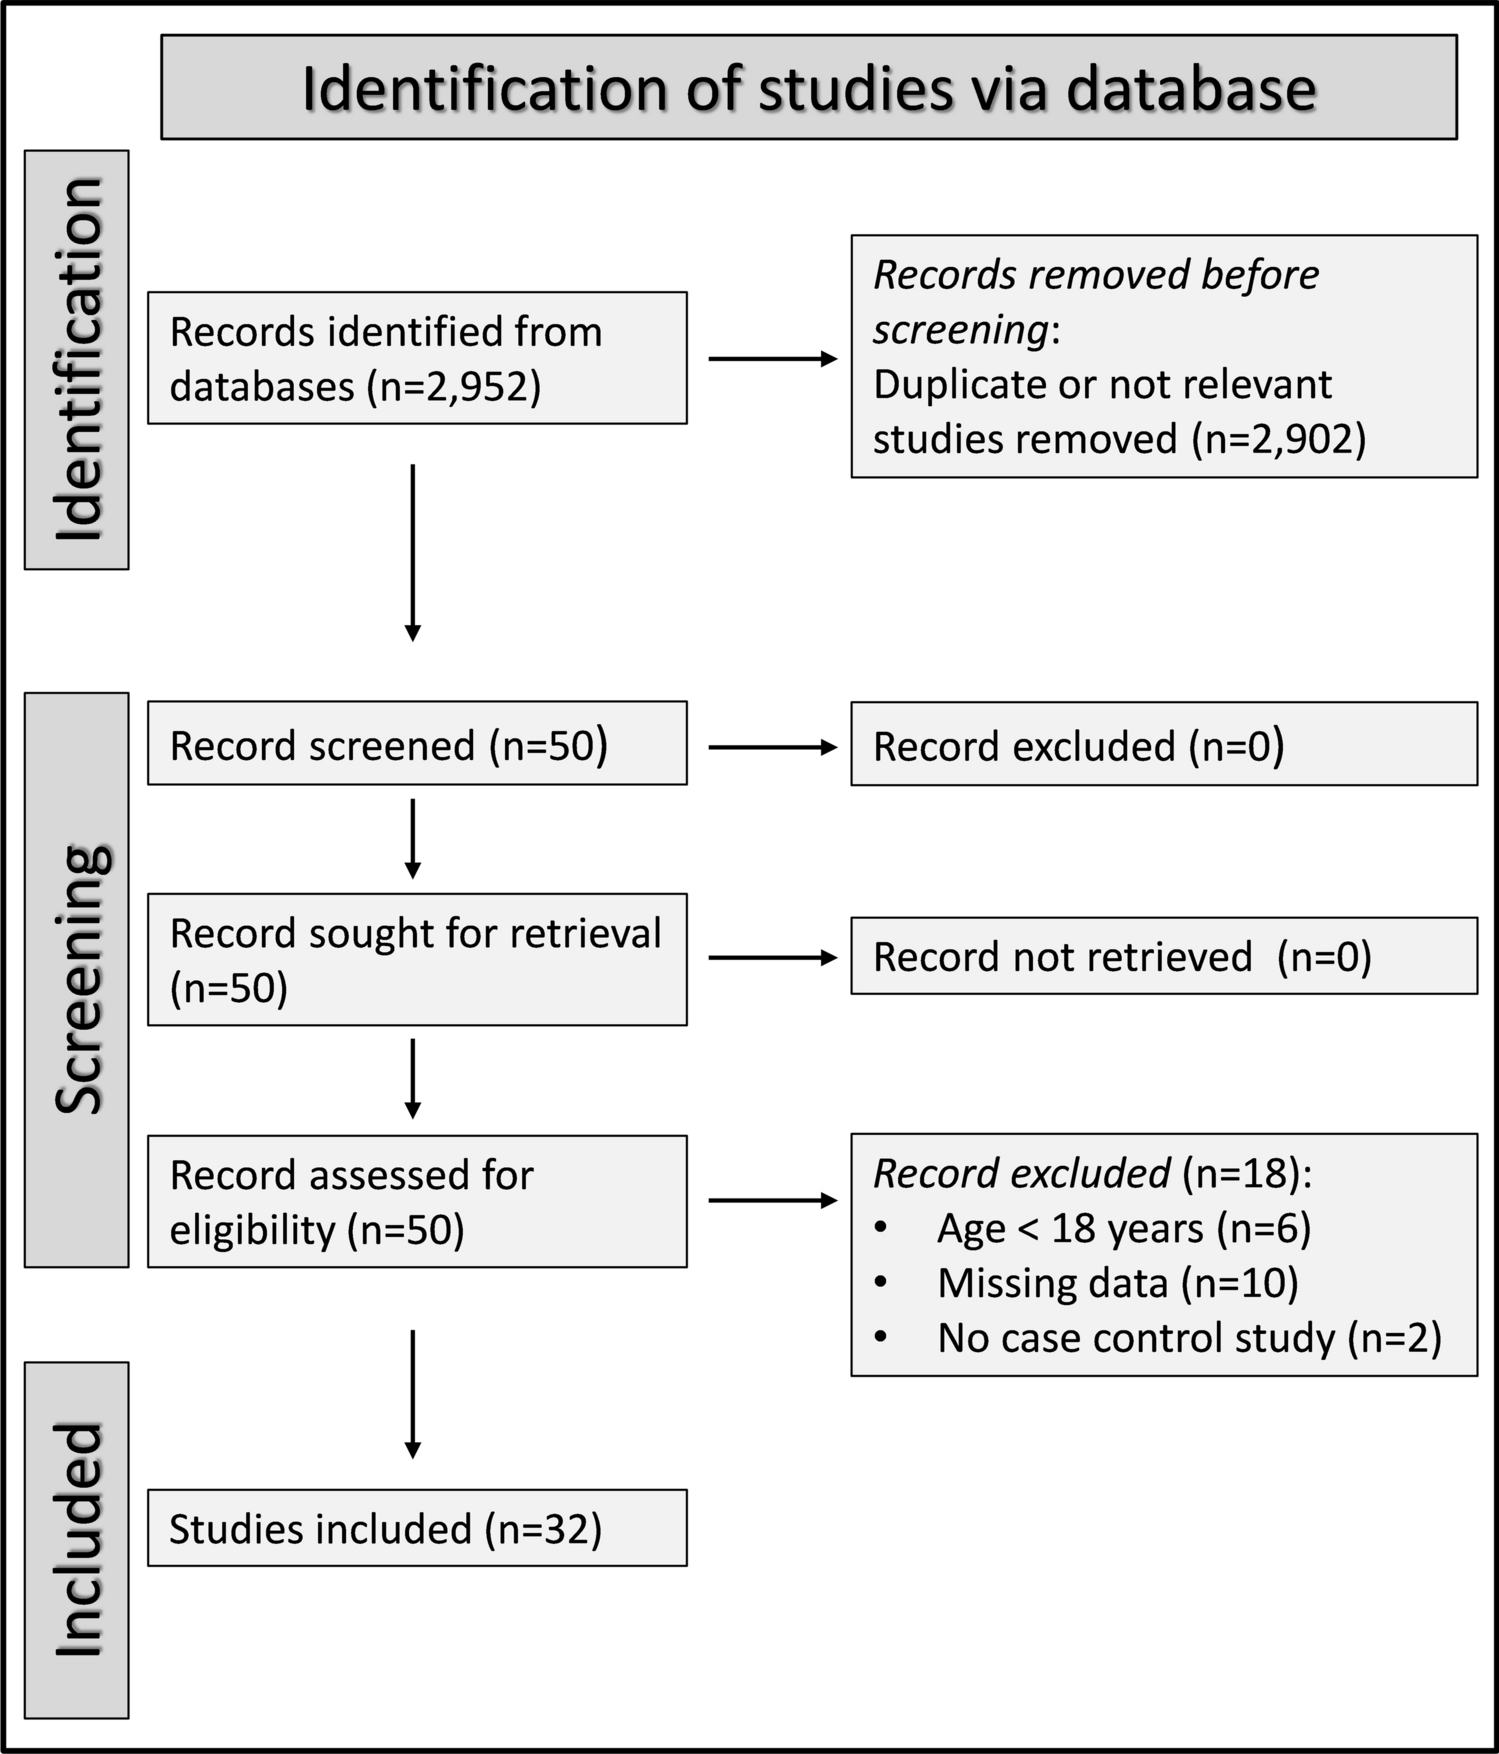 The potential role of serum amyloid A as biomarker of rheumatic diseases: a systematic review and meta-analysis